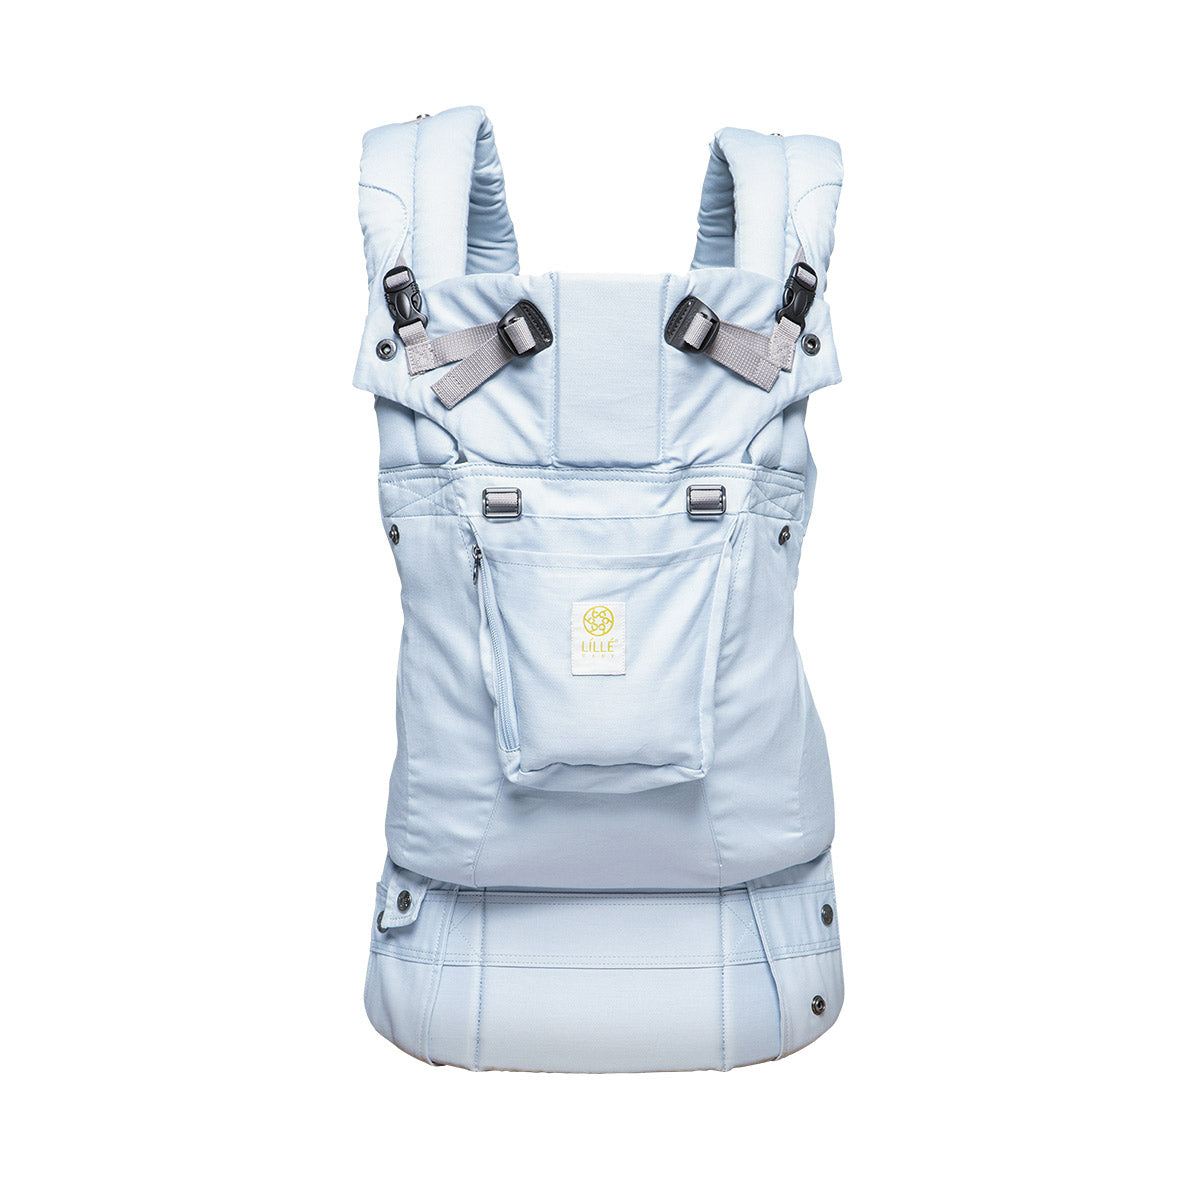 lillebaby complete organi-touch baby carrier in powder blue